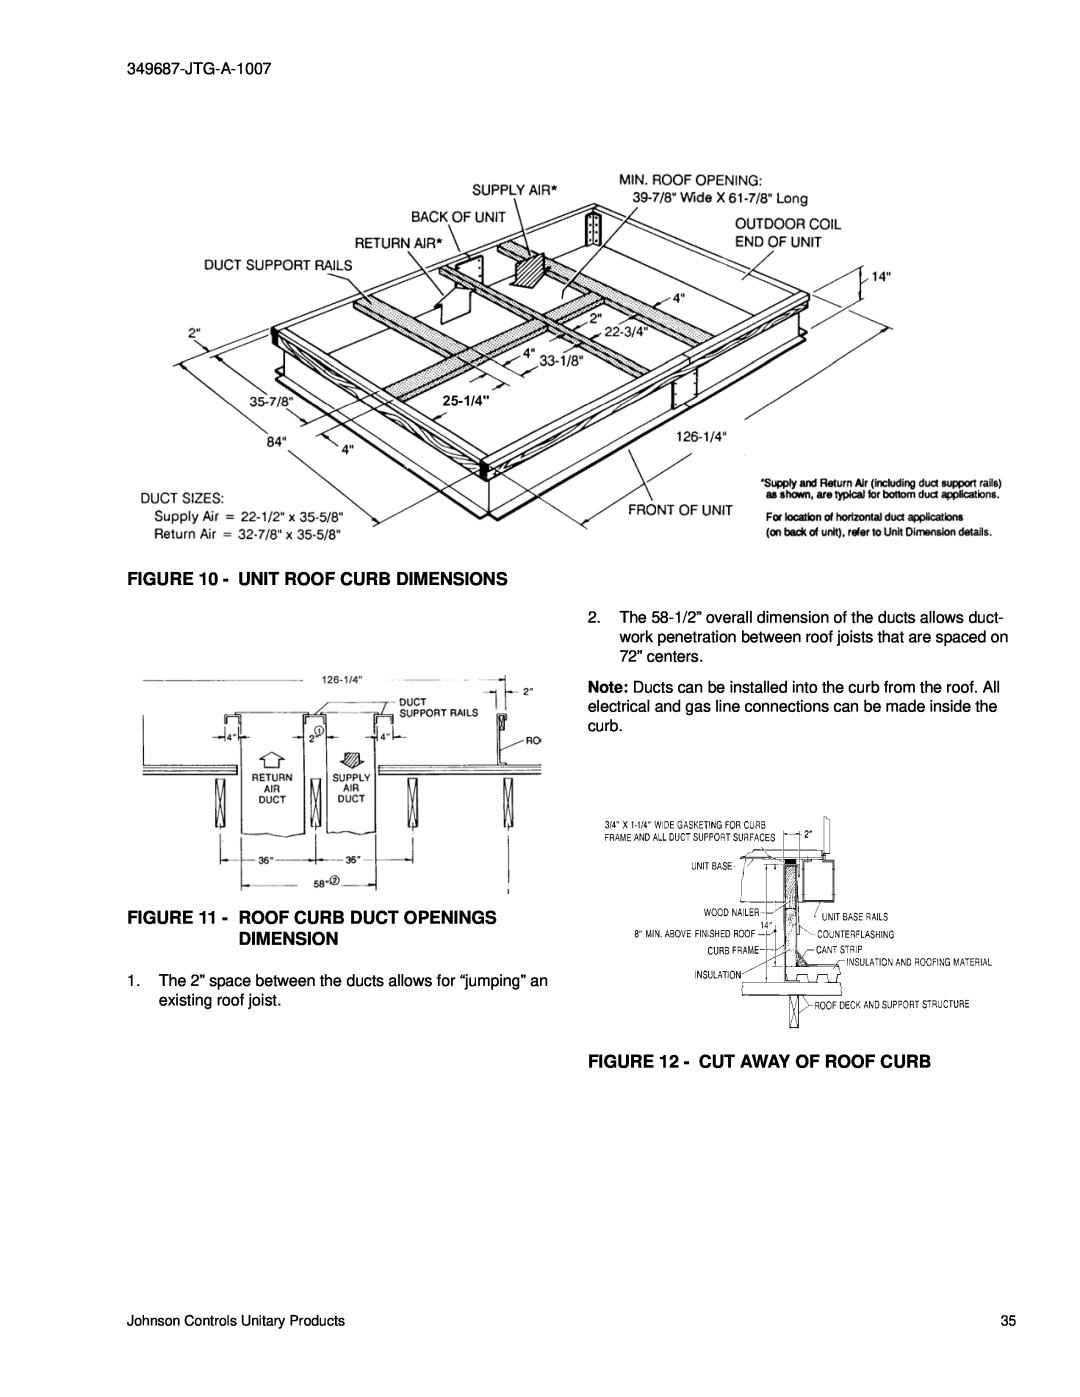 Johnson Controls J15 warranty Unit Roof Curb Dimensions, Roof Curb Duct Openings Dimension, Cut Away Of Roof Curb 